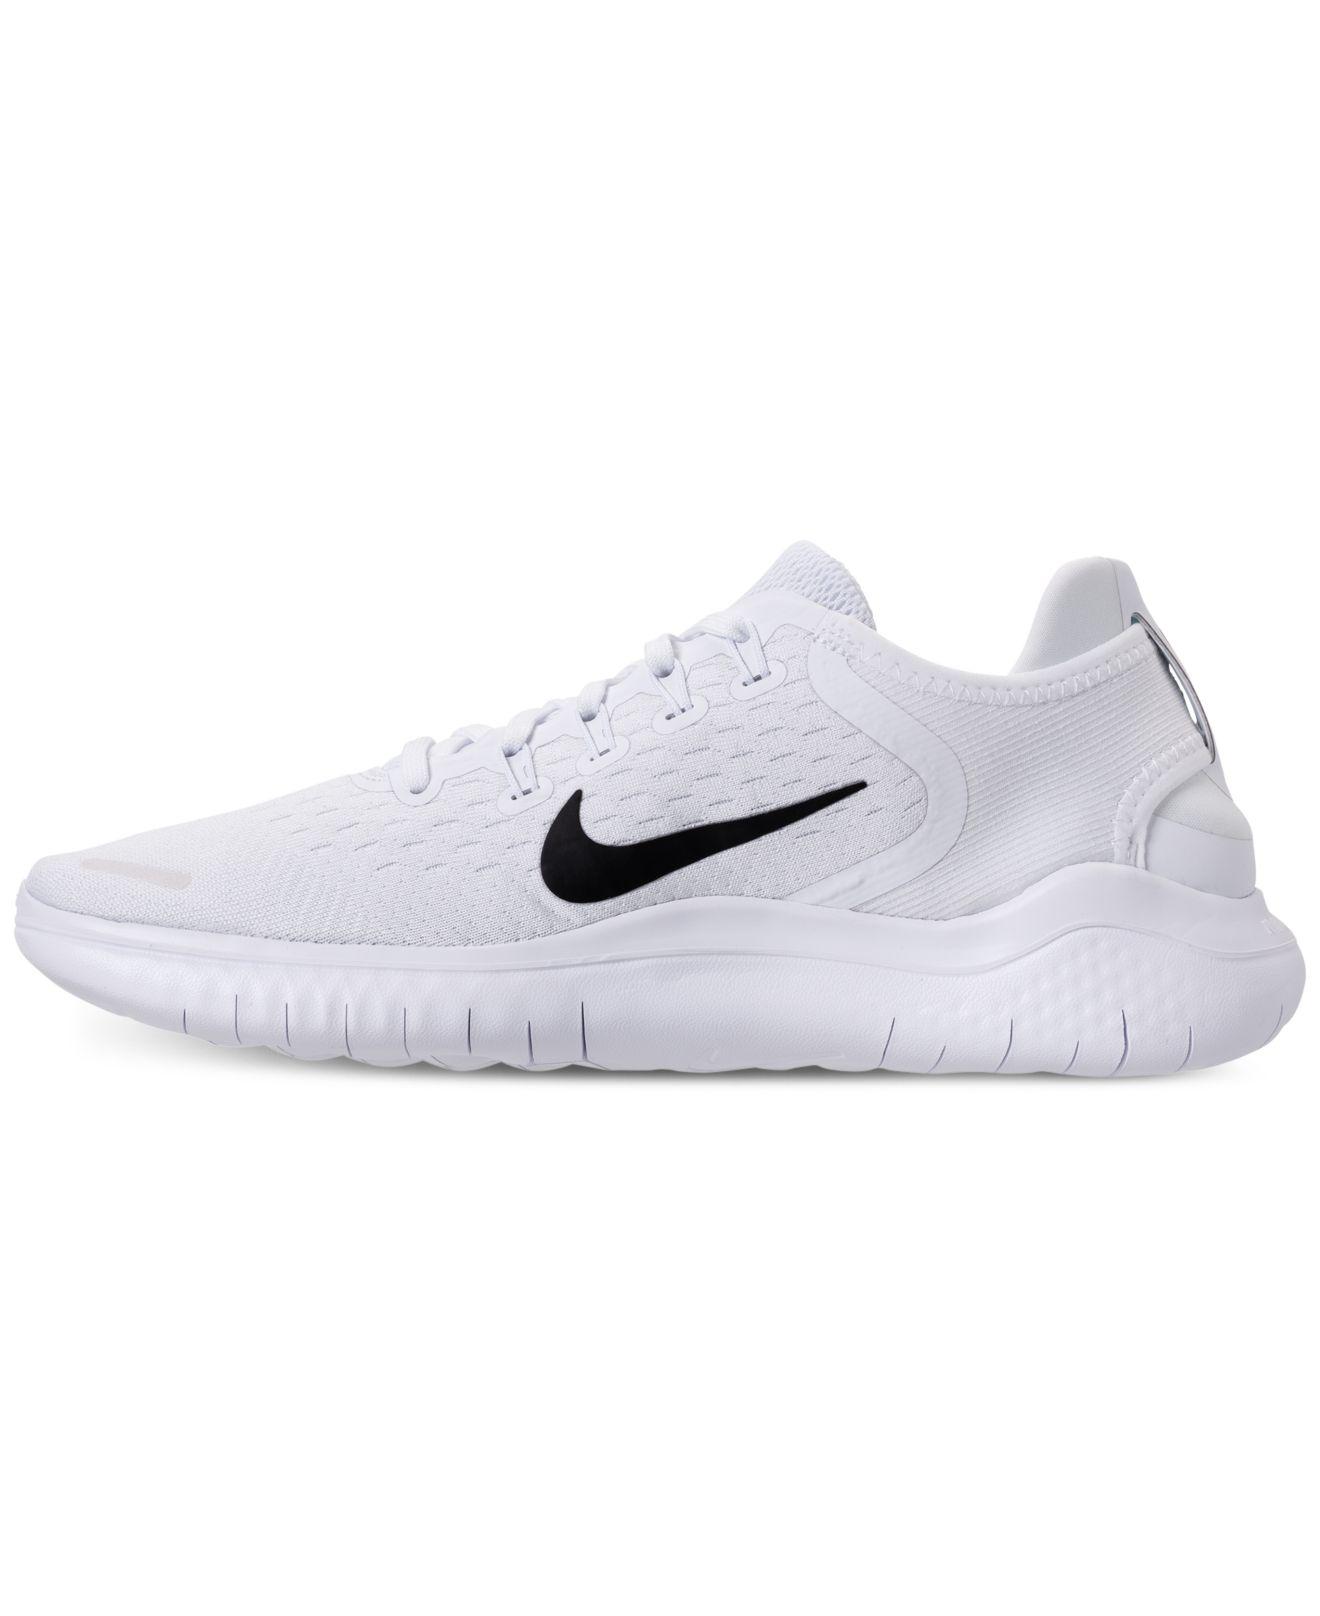 Nike Synthetic Free Rn 2018 in White 